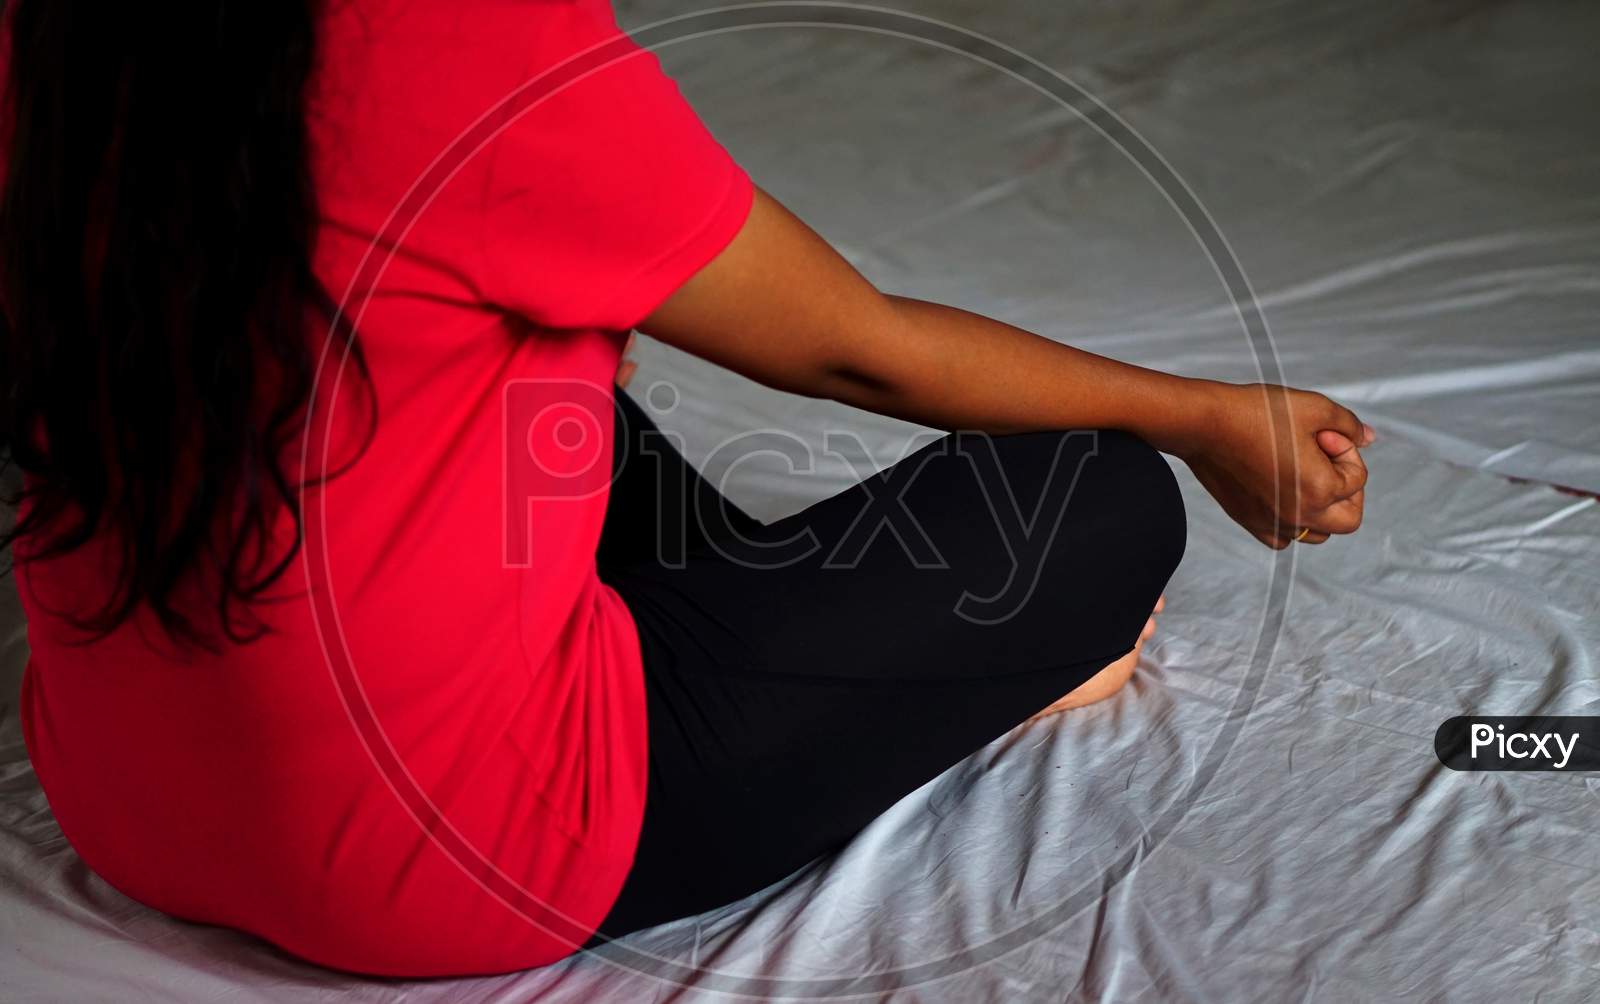 Indian Woman Practicing Yoga In Sitting And Meditating Pose